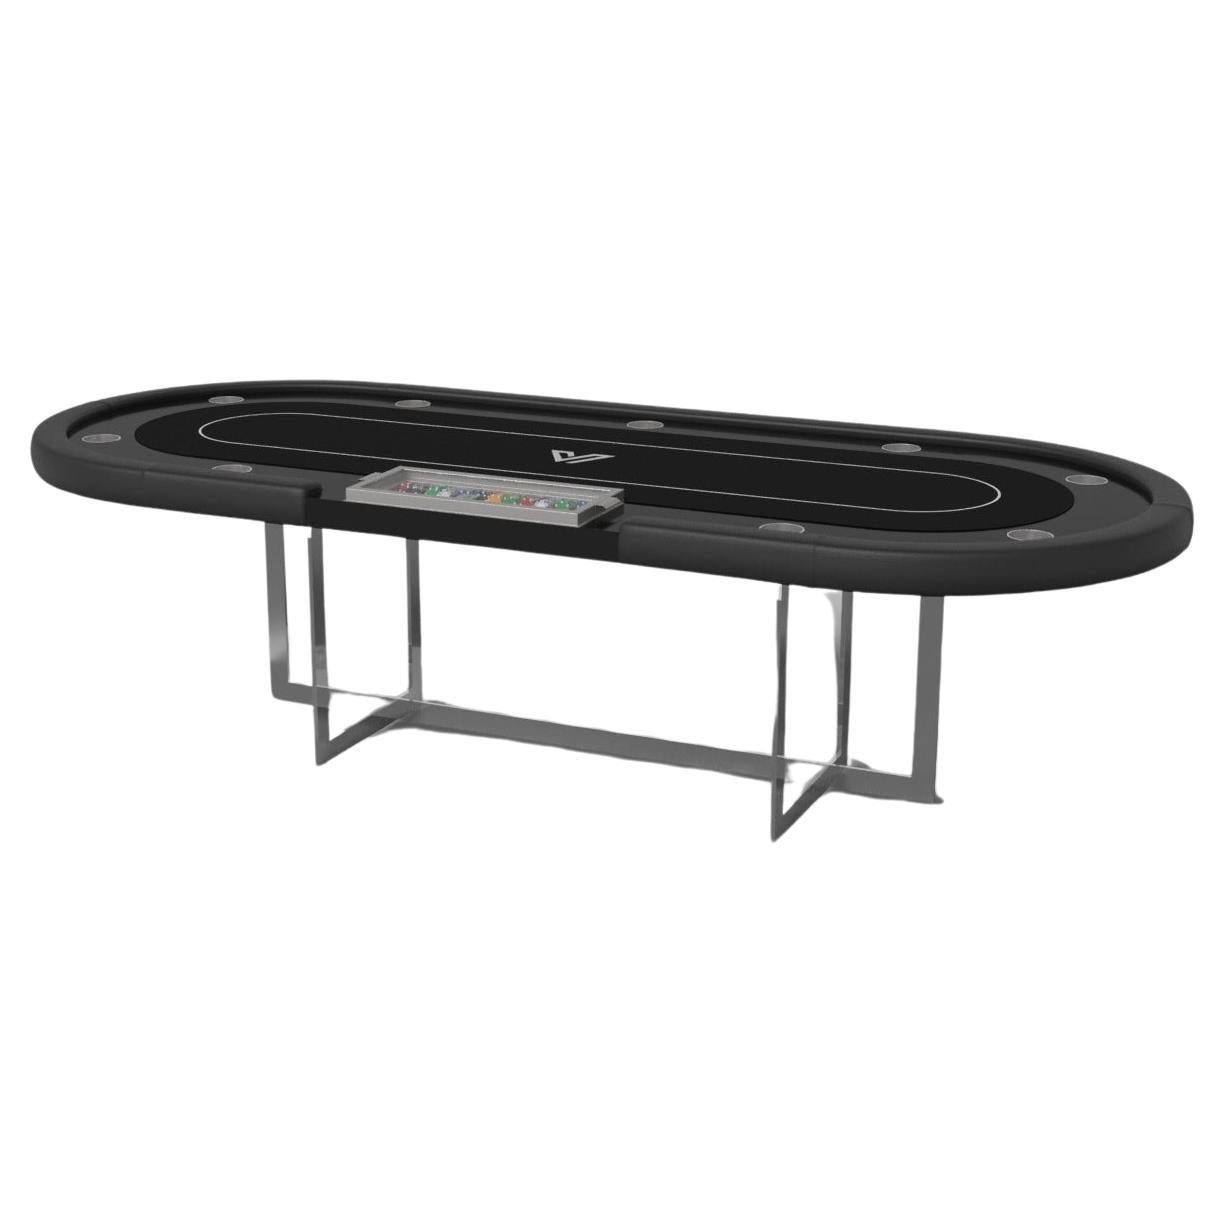 Elevate Customs Beso Poker Tables / Solid Pantone Black Color in 8'8" - USA For Sale